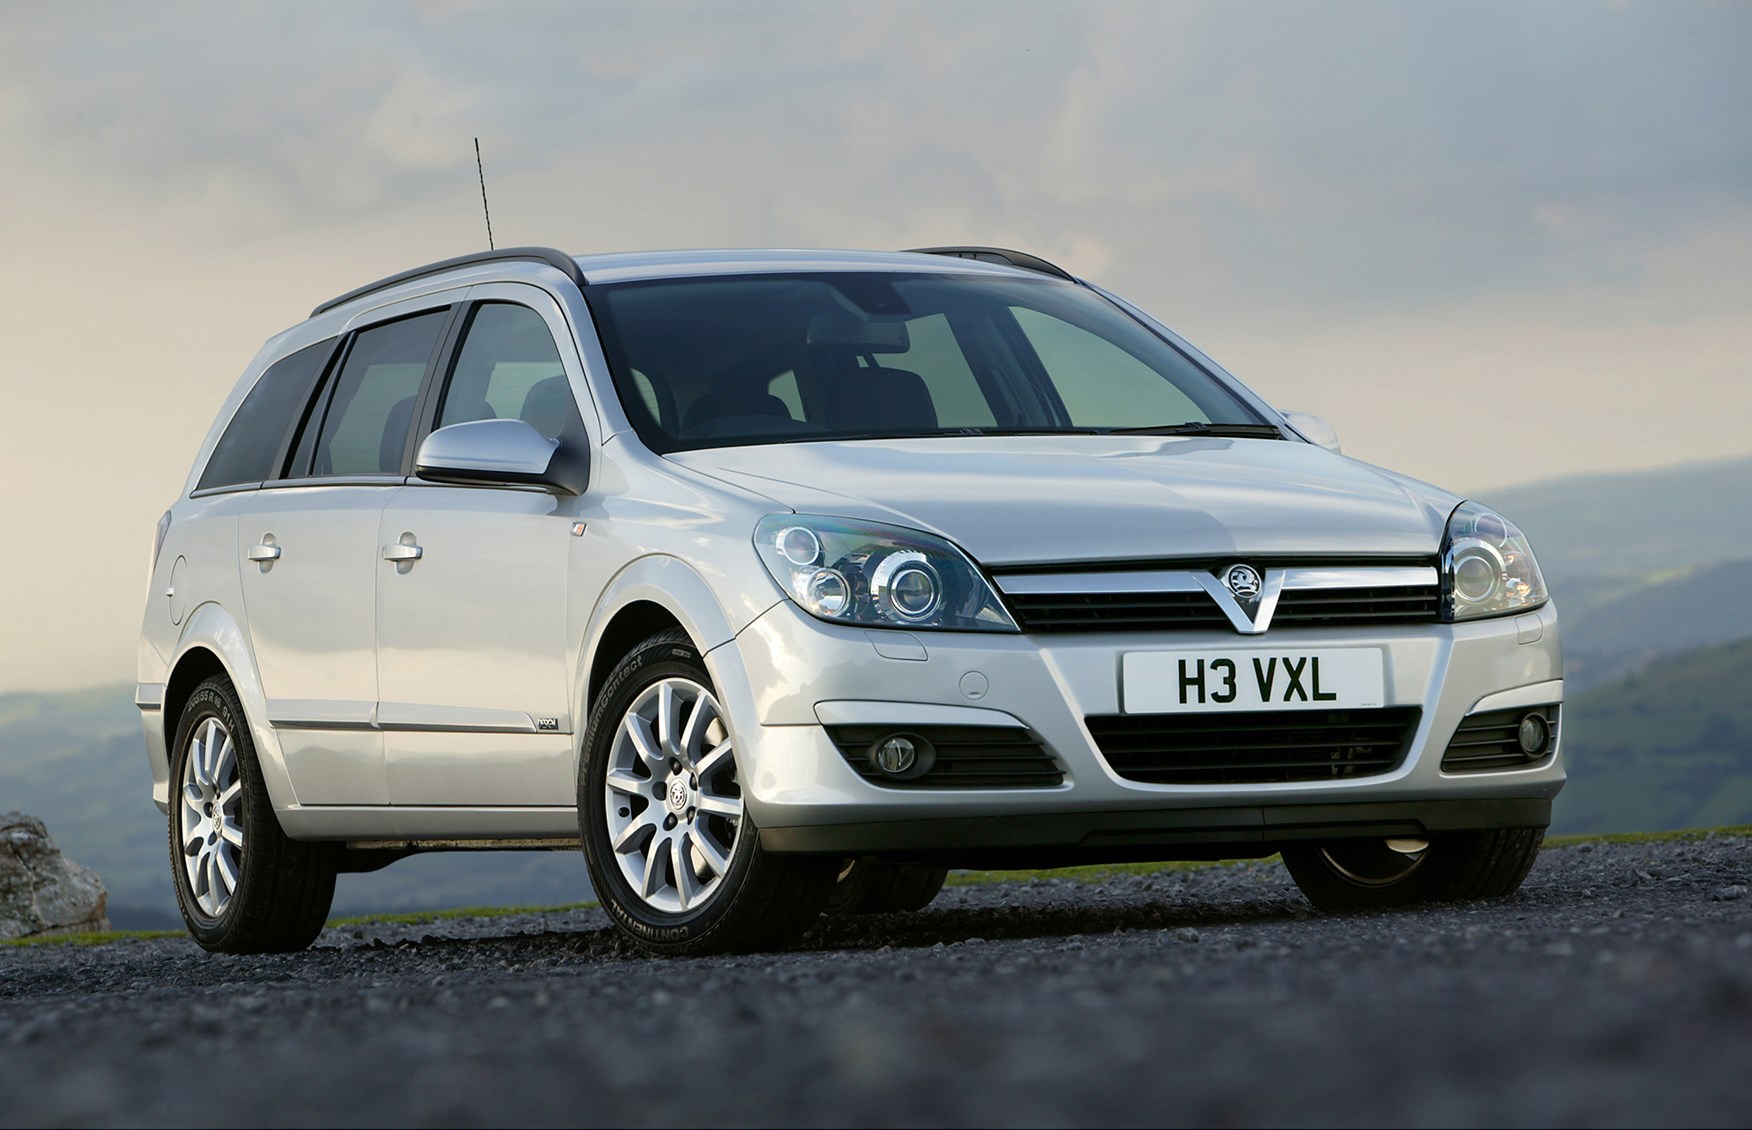 Used Vauxhall Astra Estate (2004 - 2010) Review  Parkers